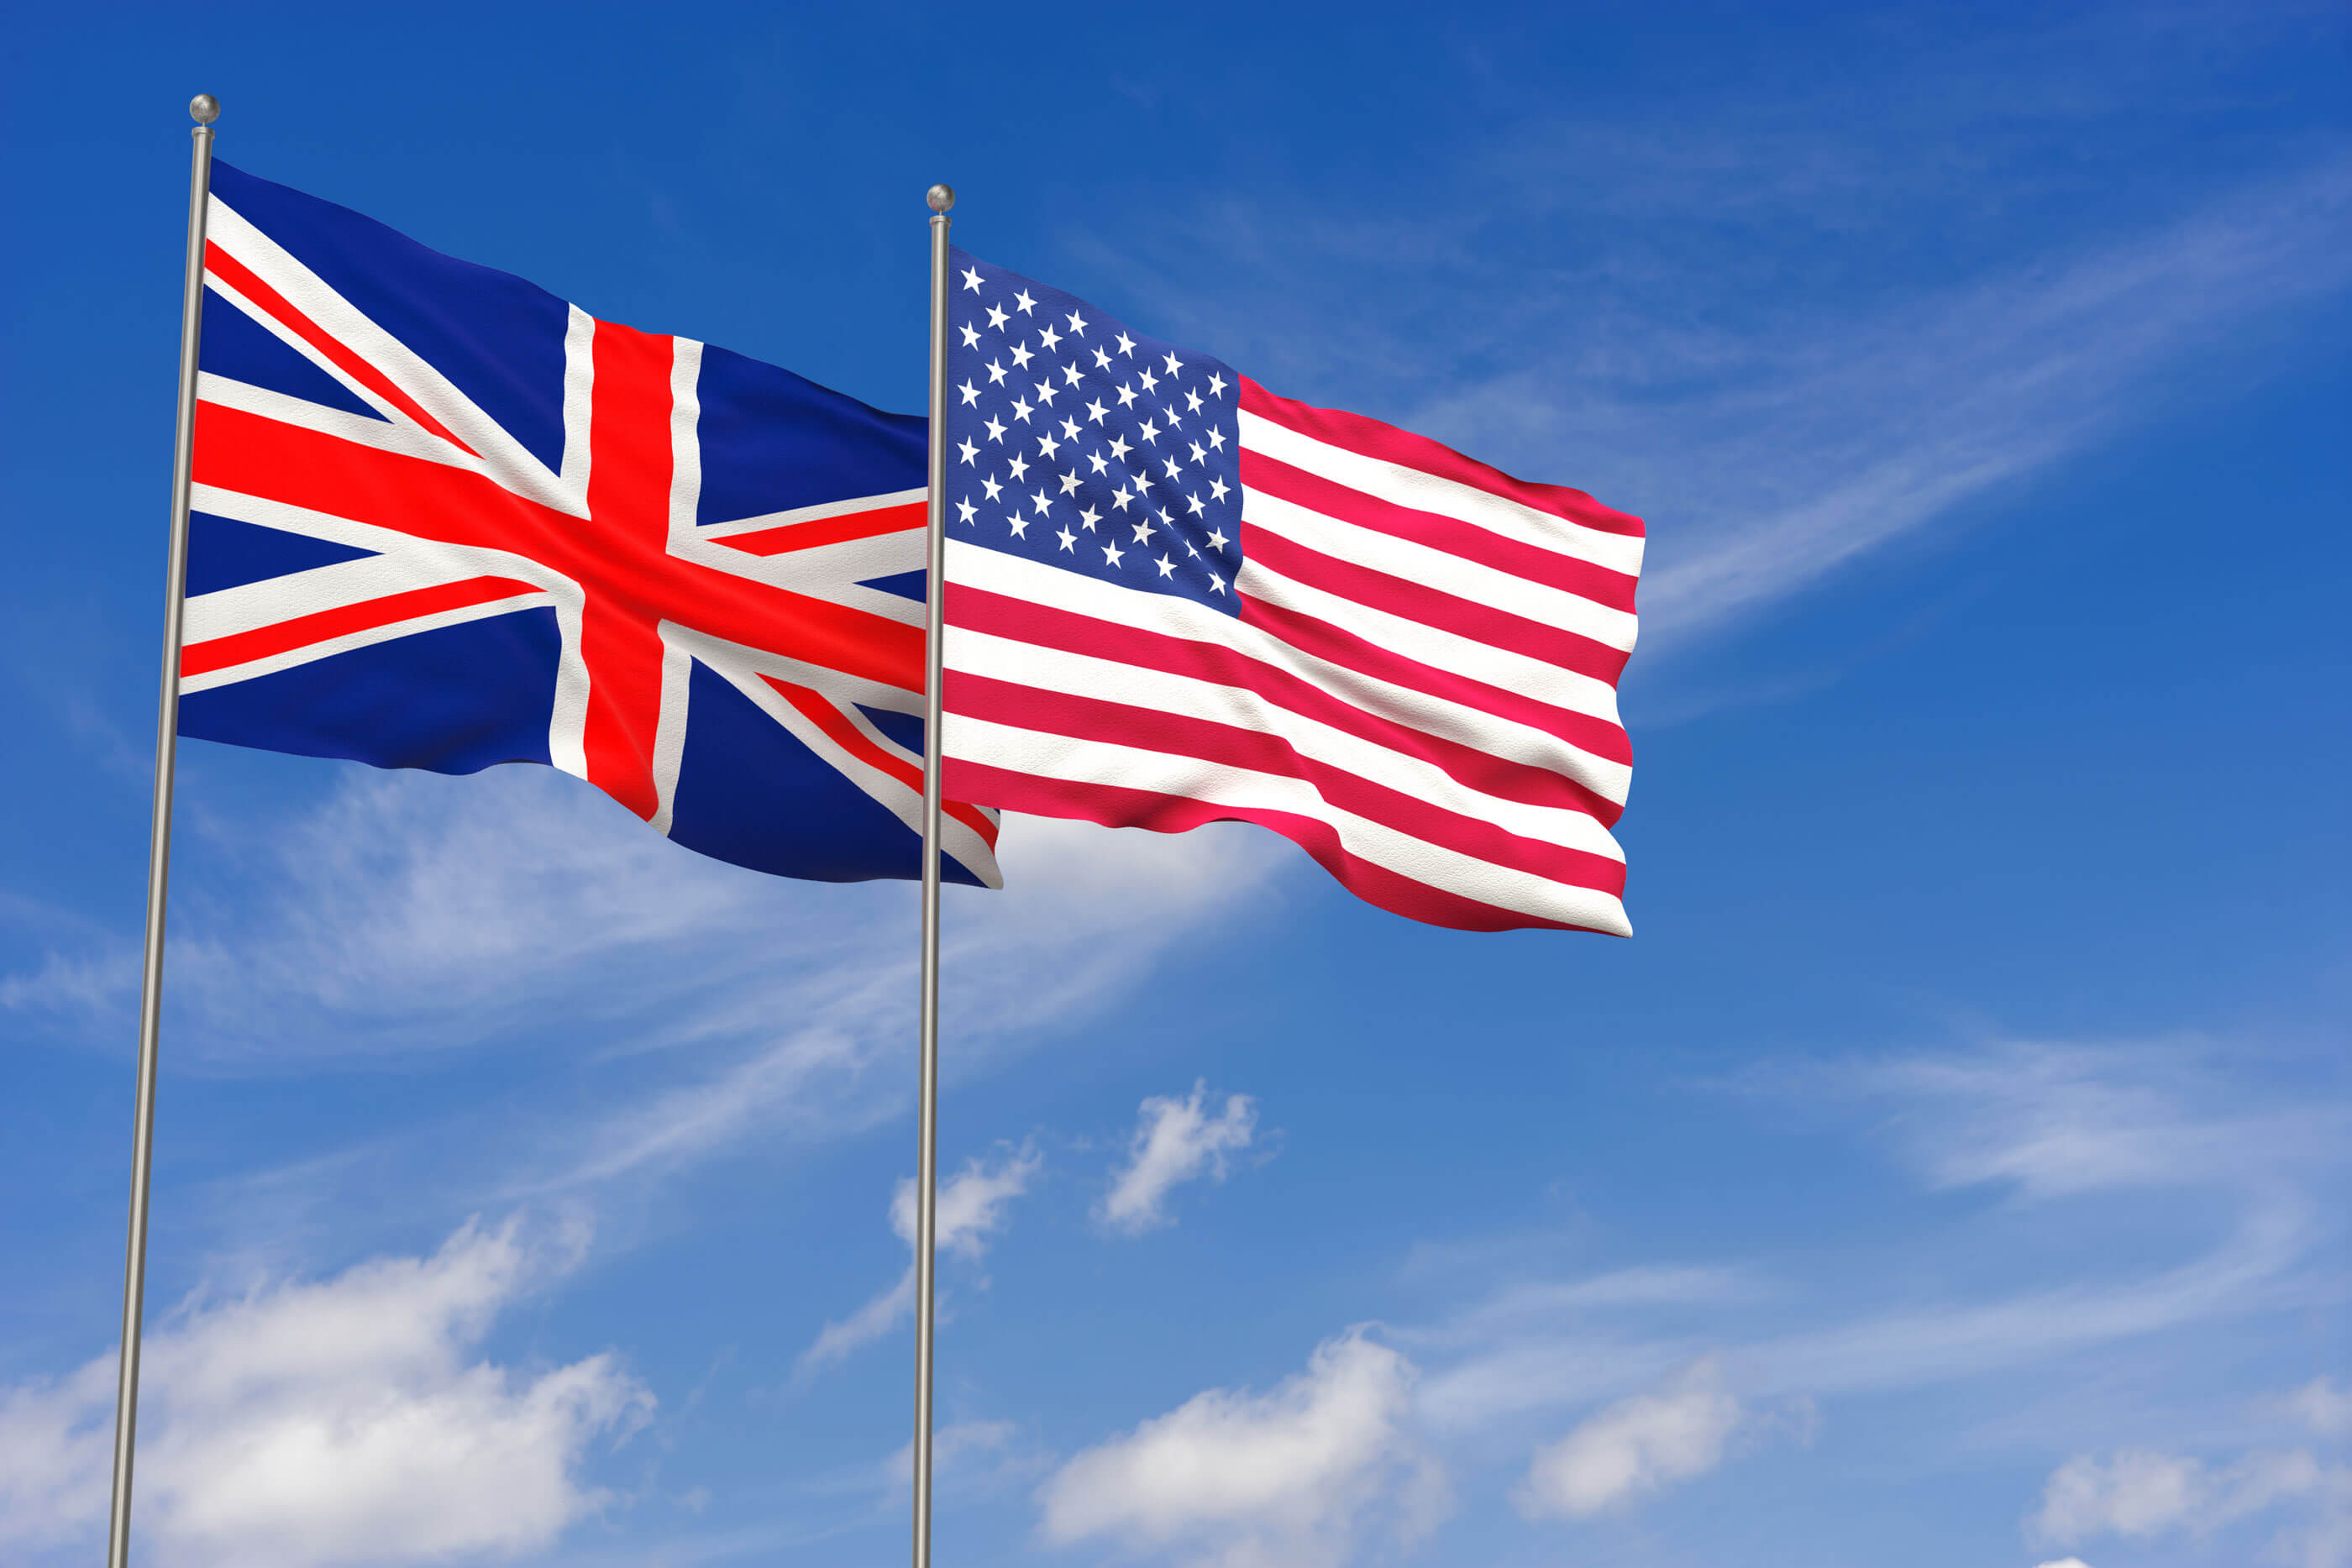 Explore the groundbreaking US-UK reciprocal architect licensing agreement, facilitating collaboration and expanding opportunities for architects across borders